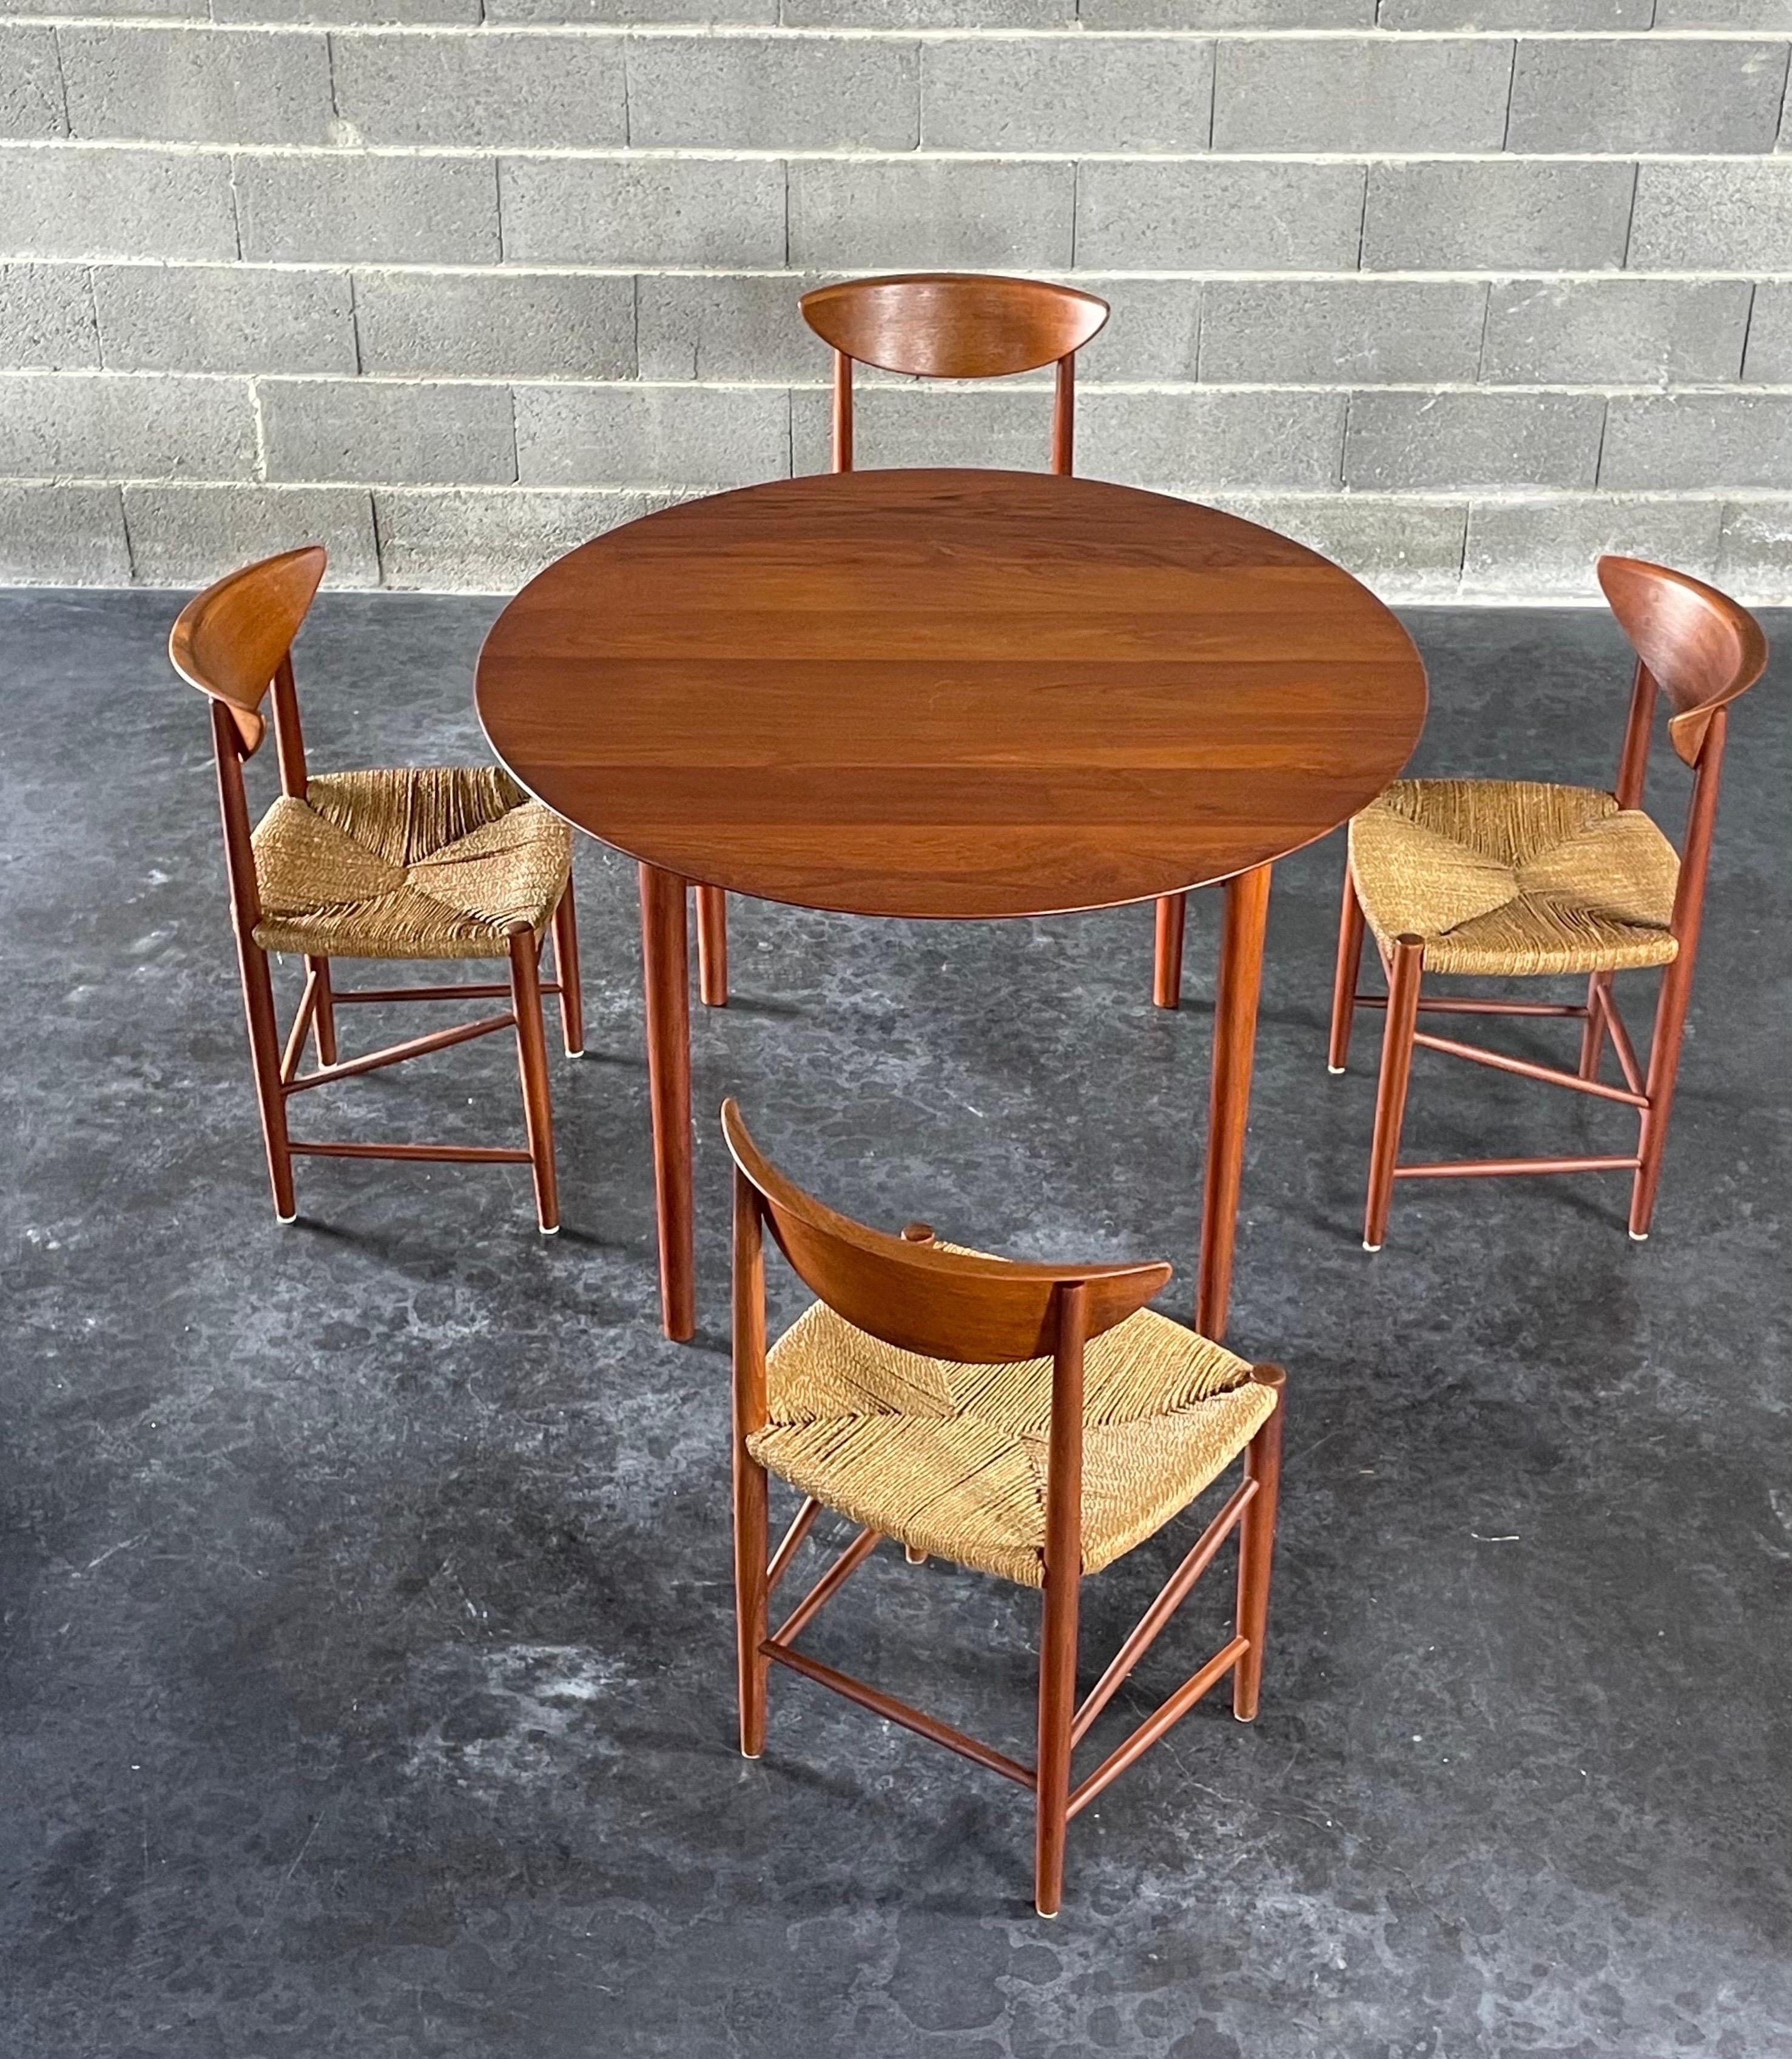 A modular dining table by the iconic Danish designer duo Peter Hvidt and Orla Mølgaard Nielsen. Made in Denmark by France & Søn circa 1950s. The extra leave in the middle easily accommodate guests when needed, revealing a spacious oval-shaped top